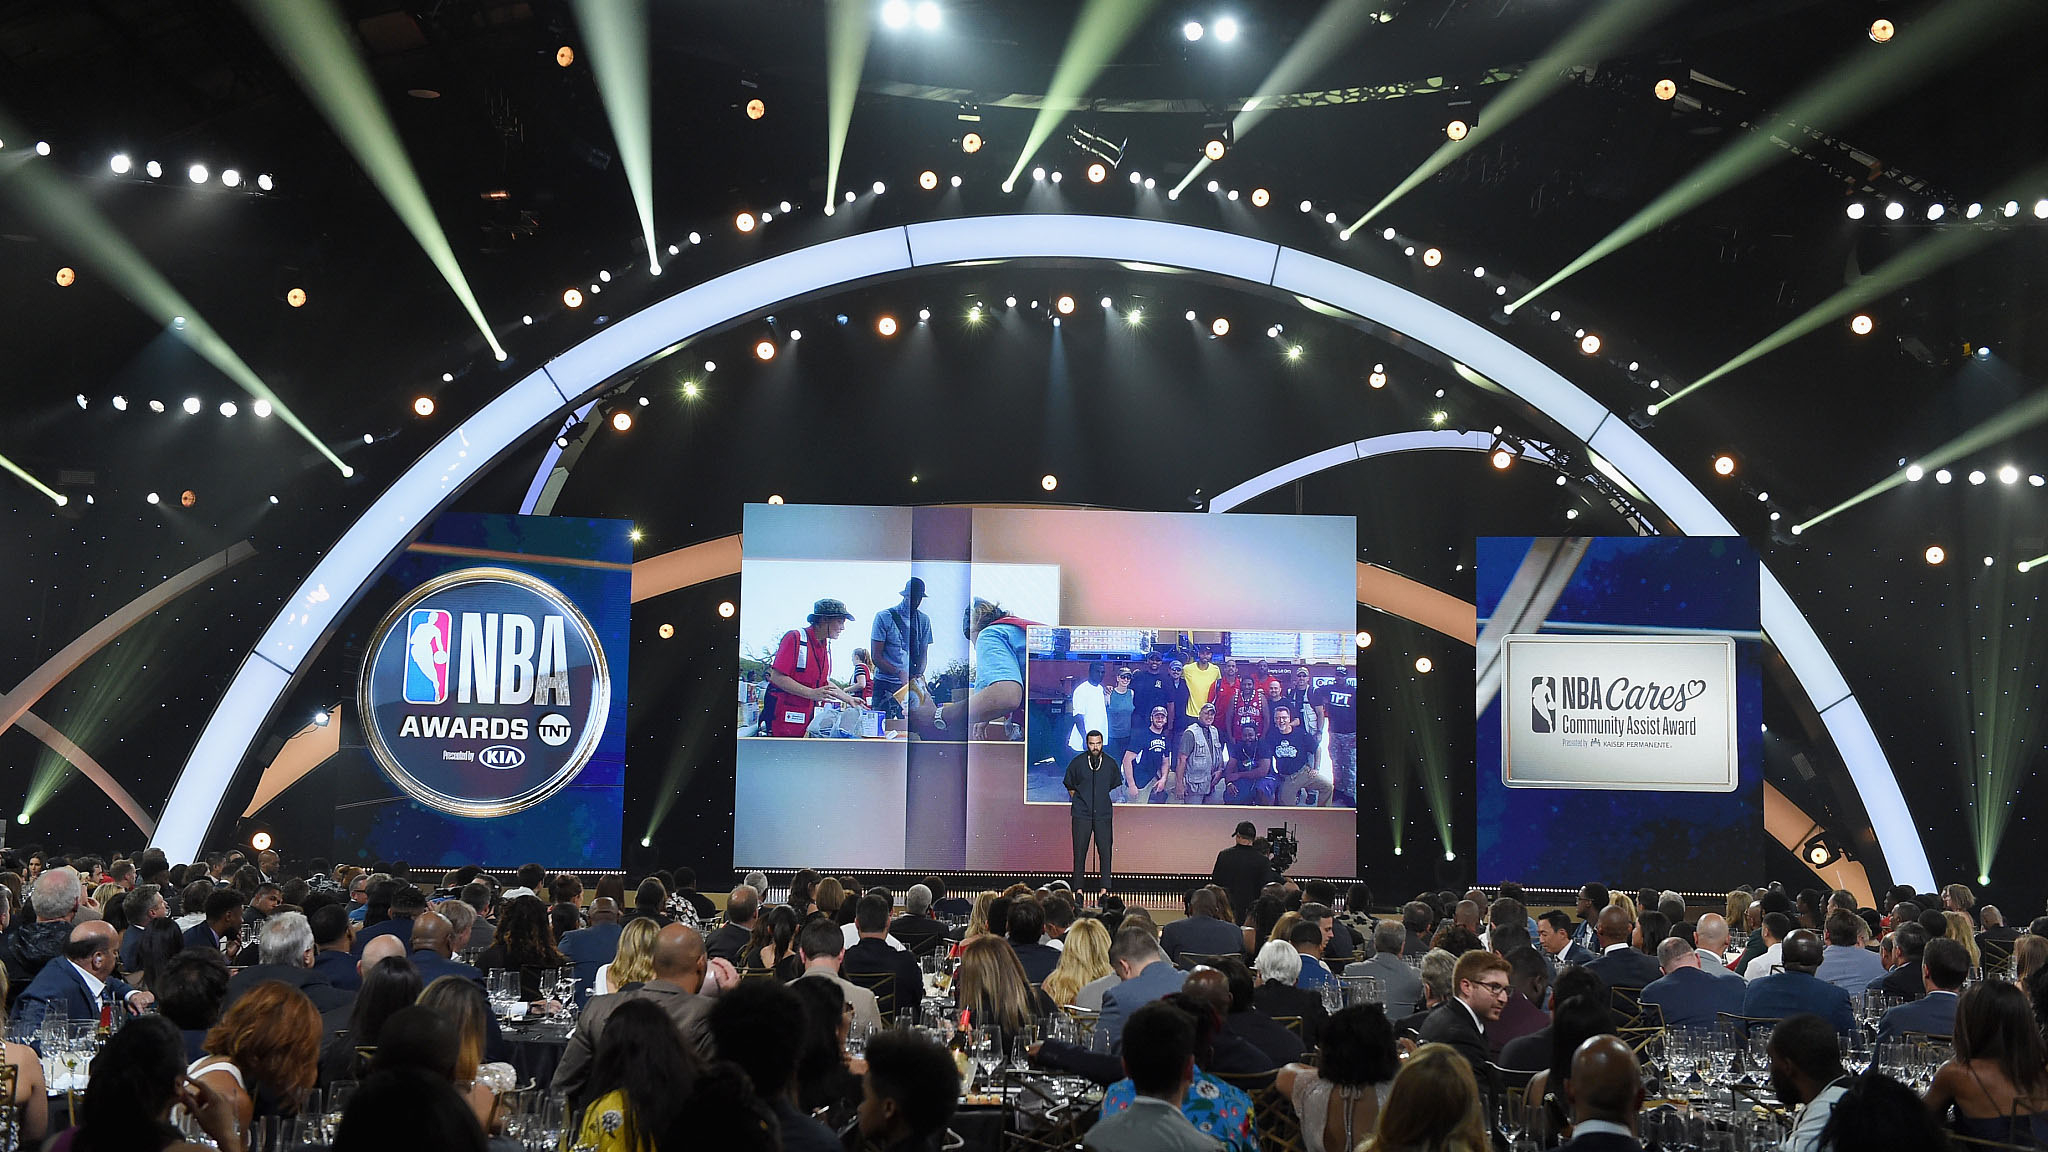 NBA Award ceremony A new competitor for the NFL CGTN